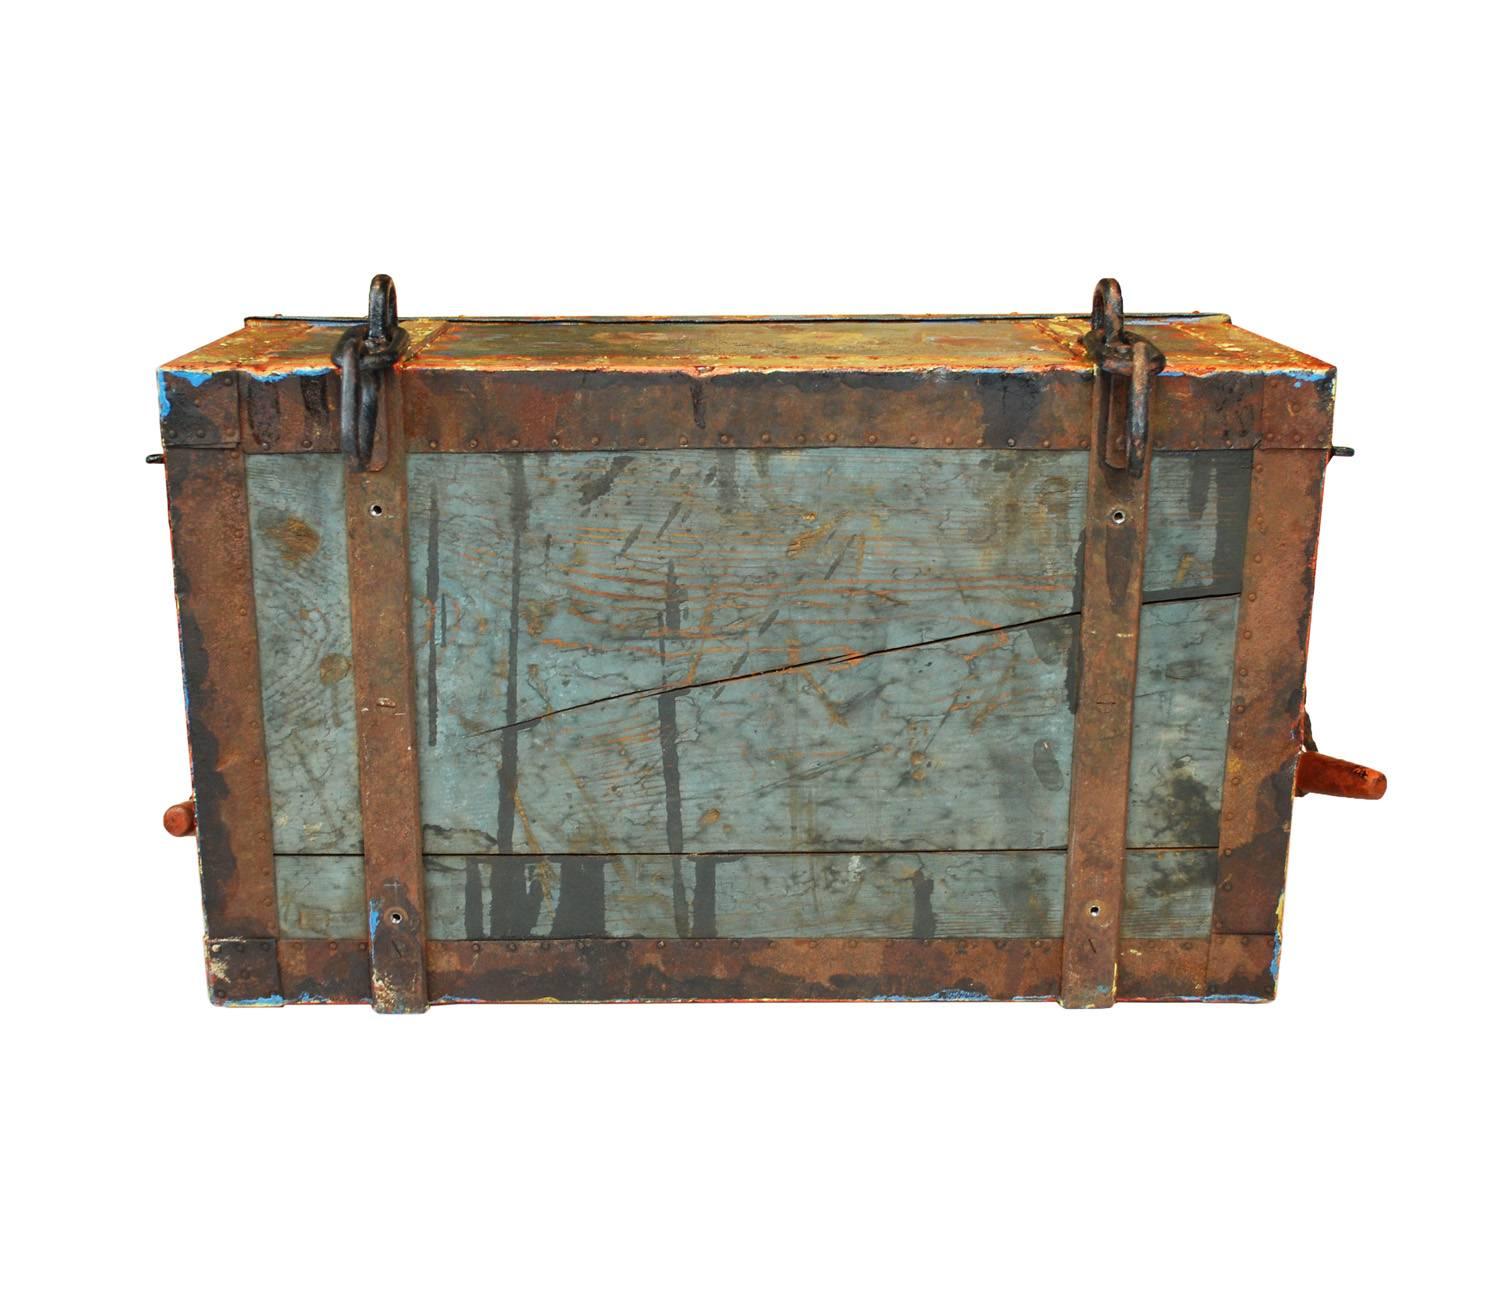 Spanish Antique Trunk Painted Wood Ship Sailing Boat